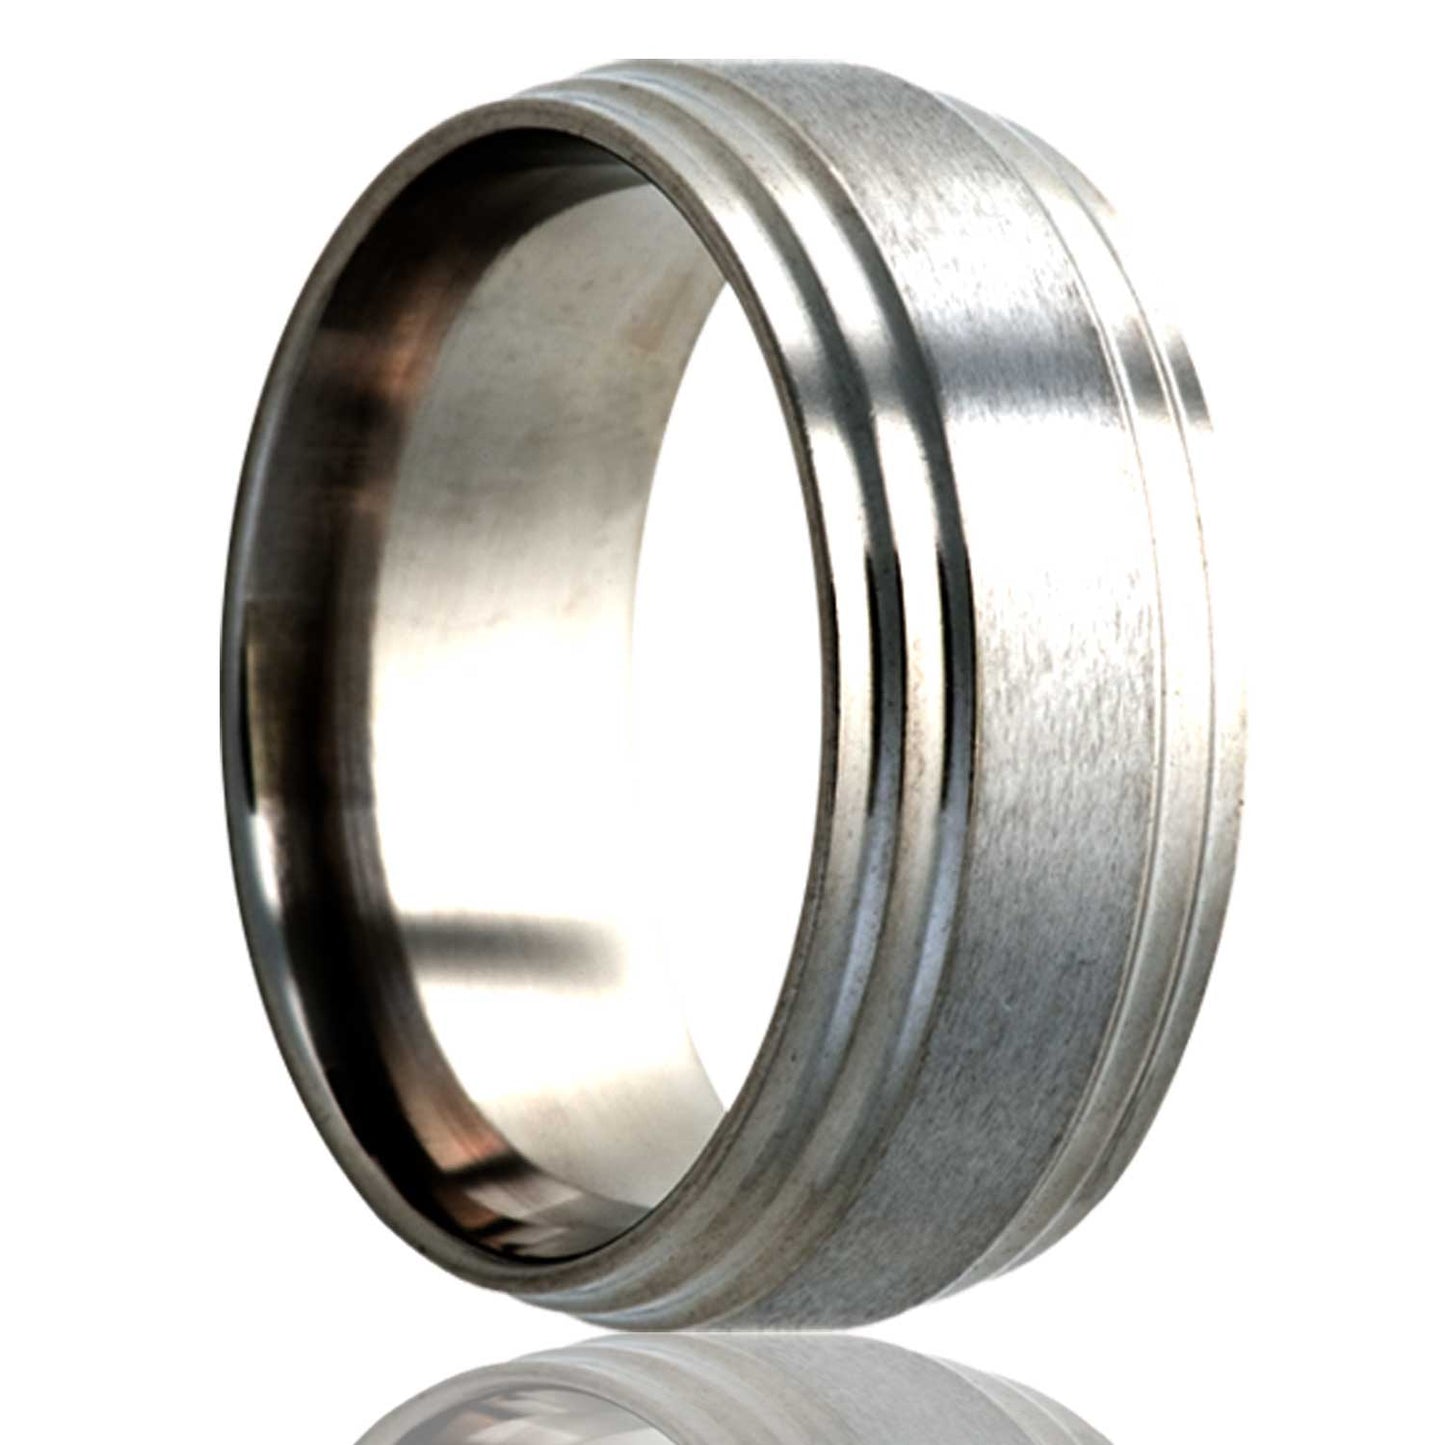 A satin finish titanium wedding band with polished stair steps edges displayed on a neutral white background.